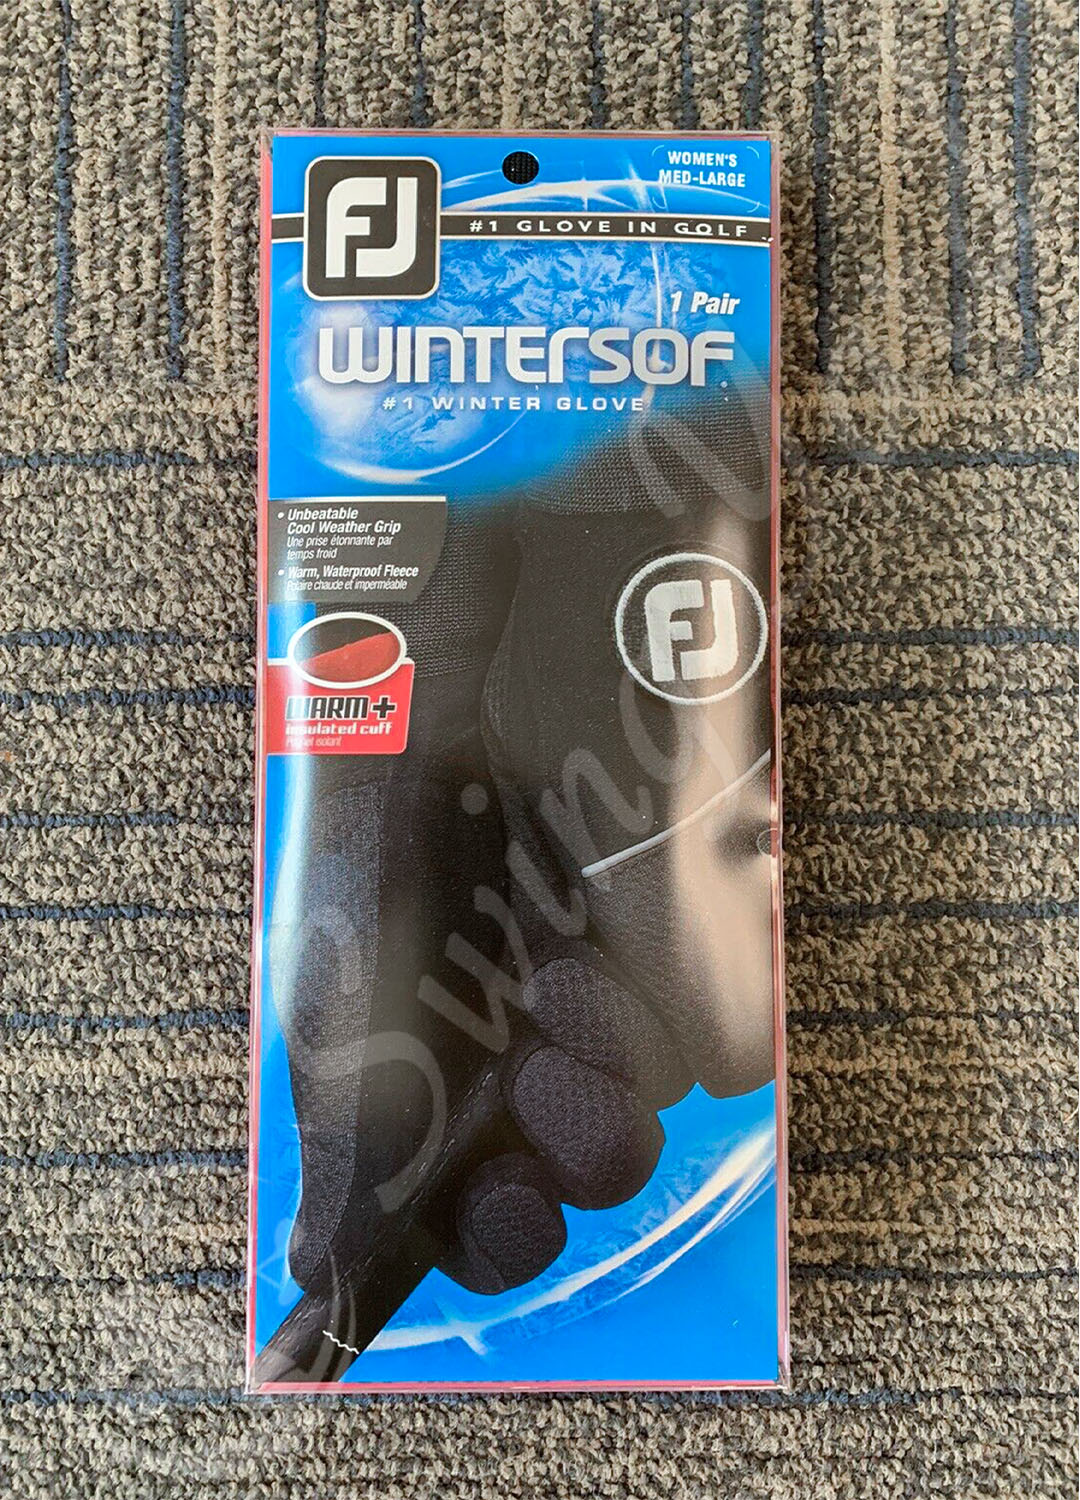 One of the best winter golf gloves for cold weather